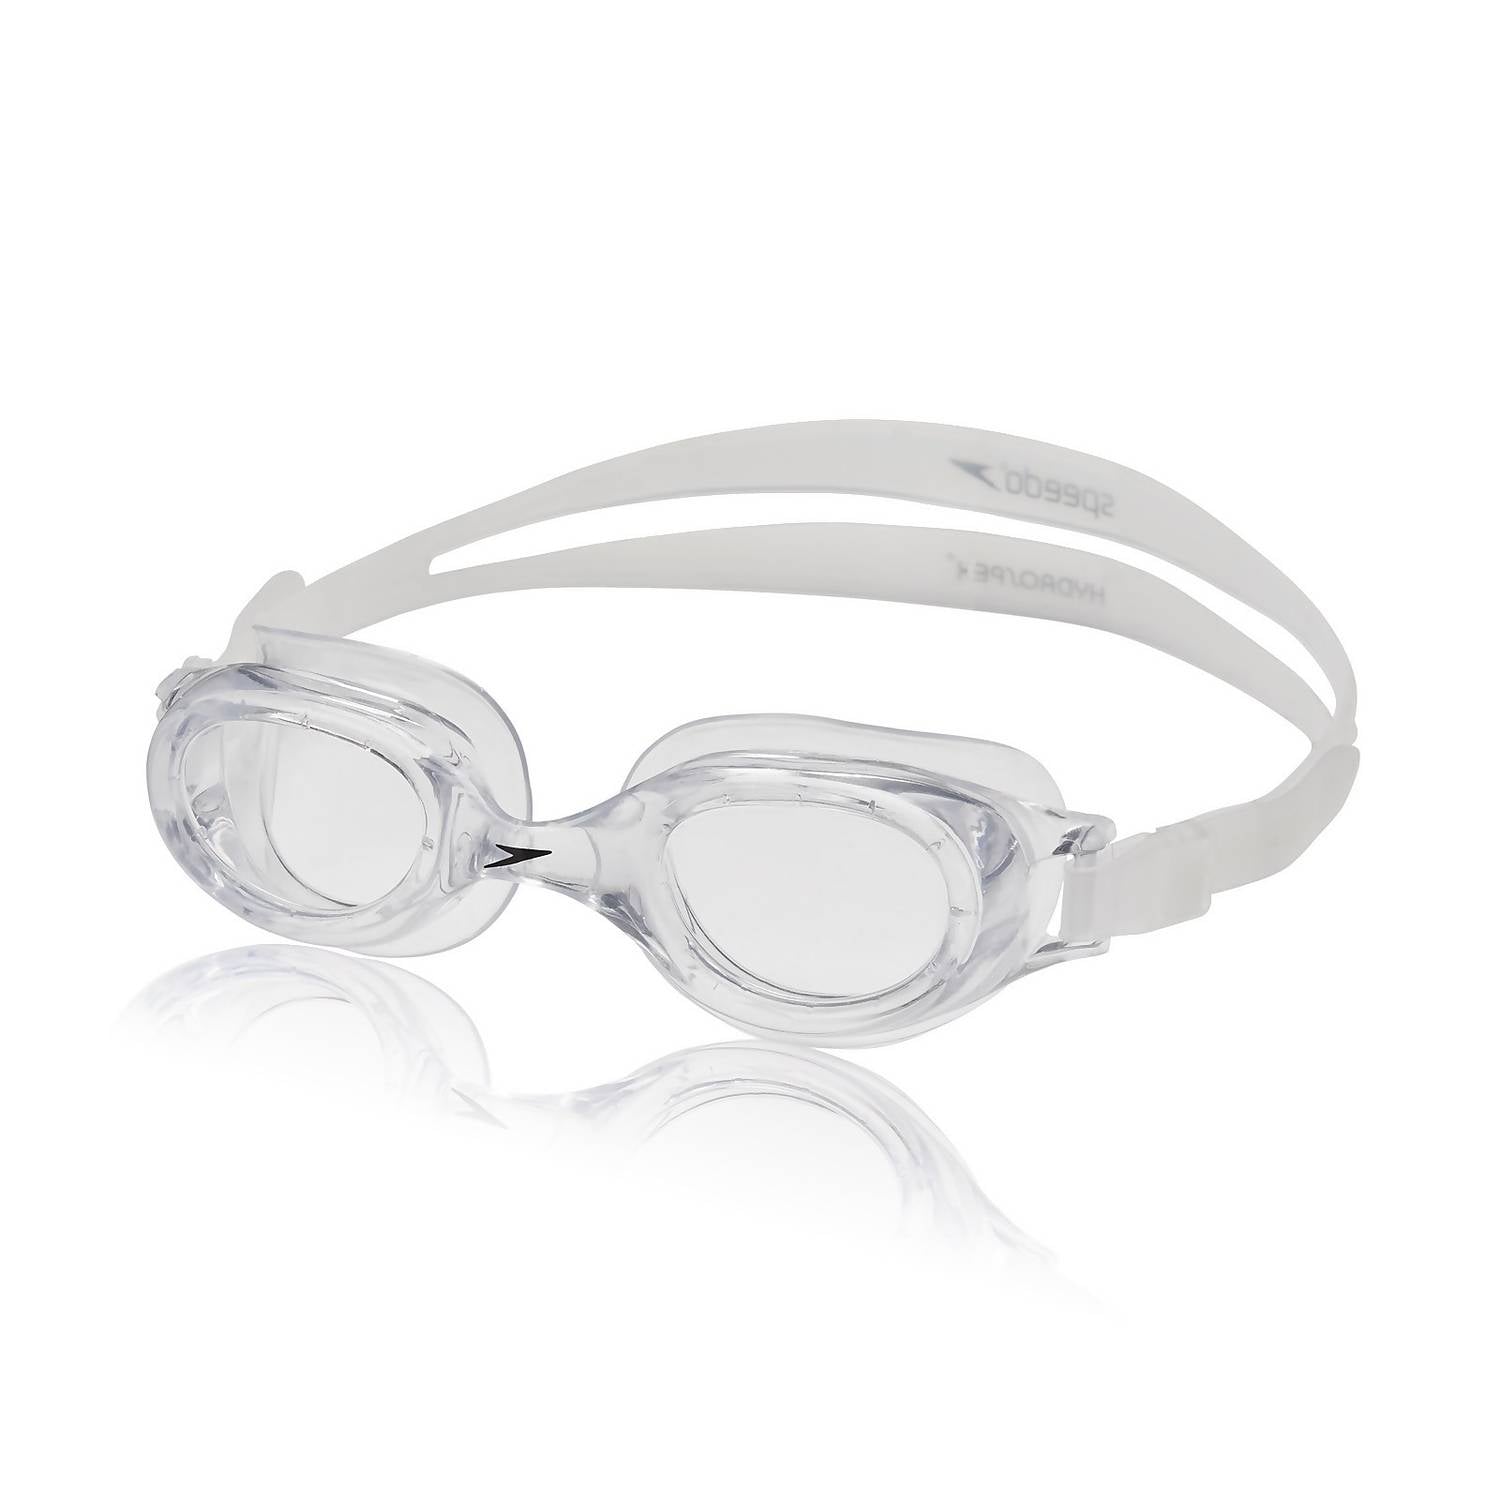 Speedo Hydrospex Classic Clear | Diving Sports Canada | Vancouver